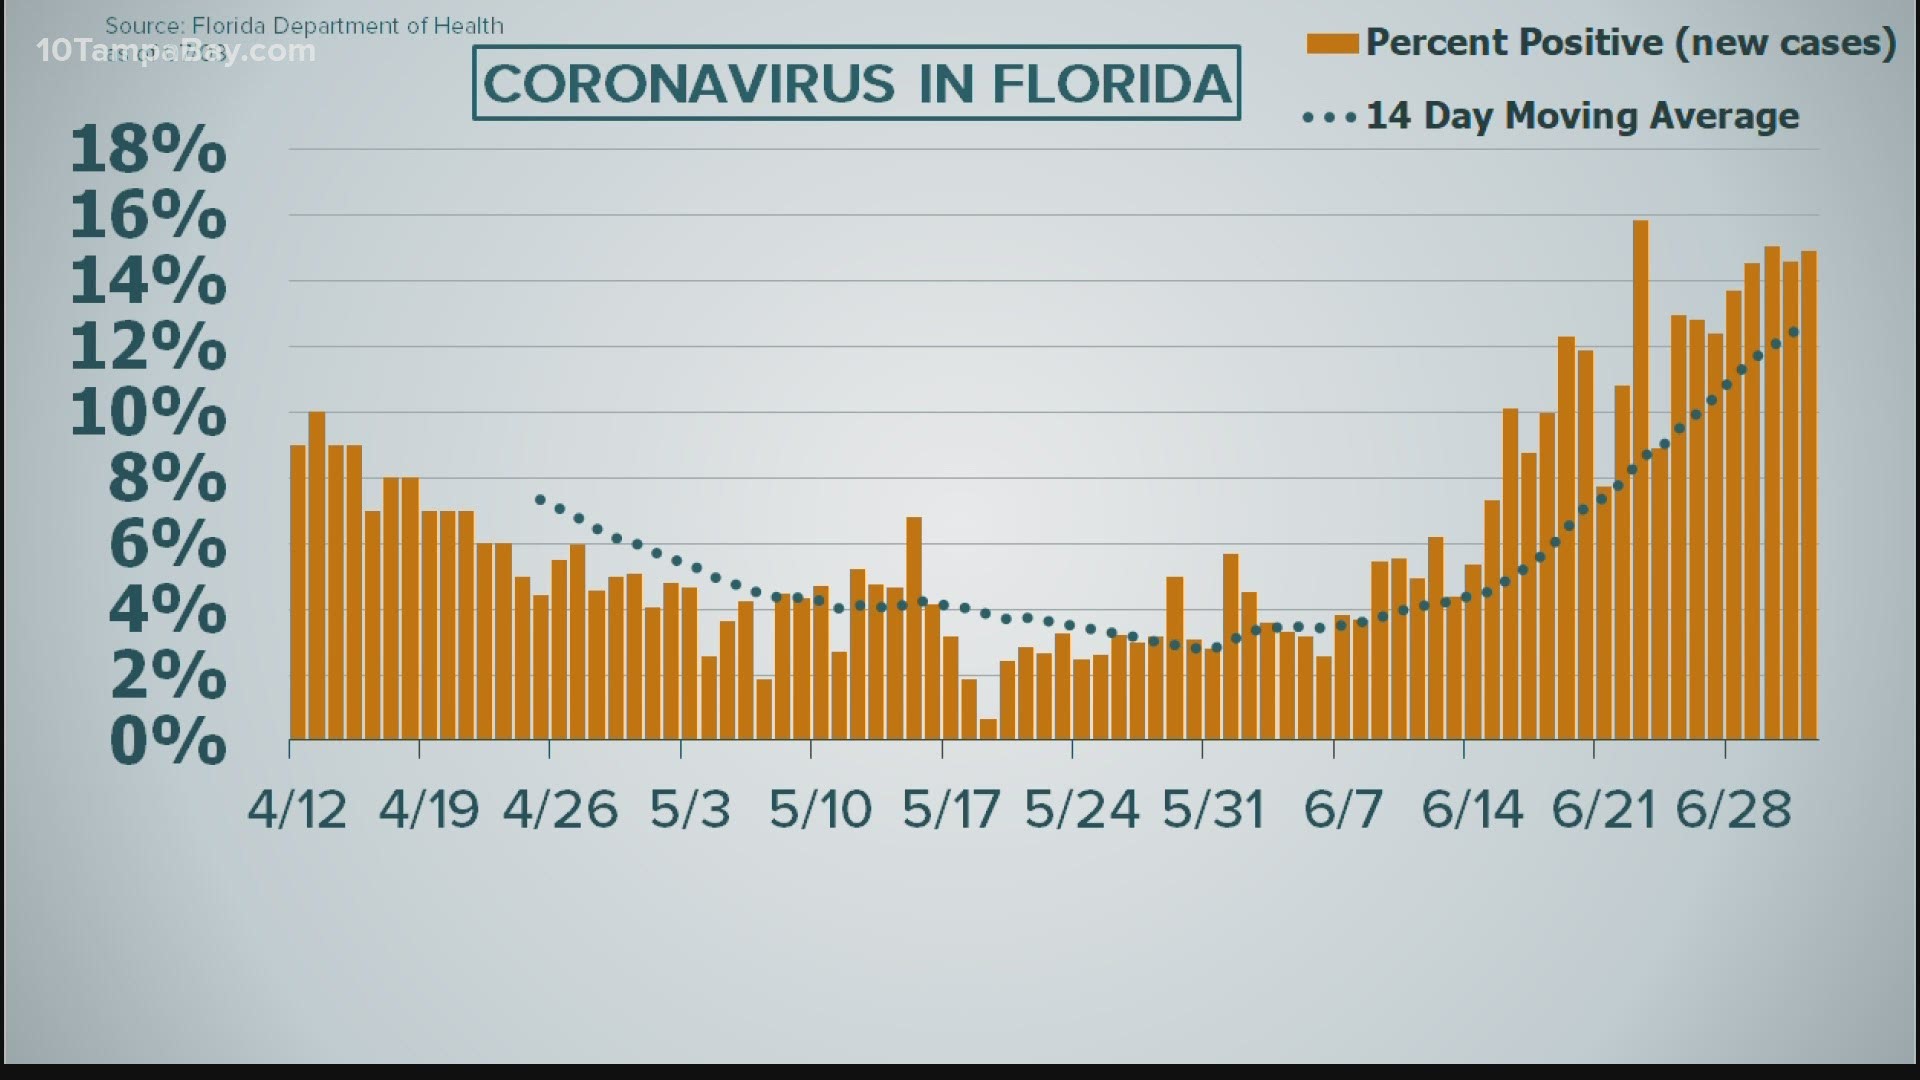 Of the more than 67,000 test results returned on July 2 in Florida, nearly 15 percent were positive. That means nearly 15 in every 100 people tested were infected.